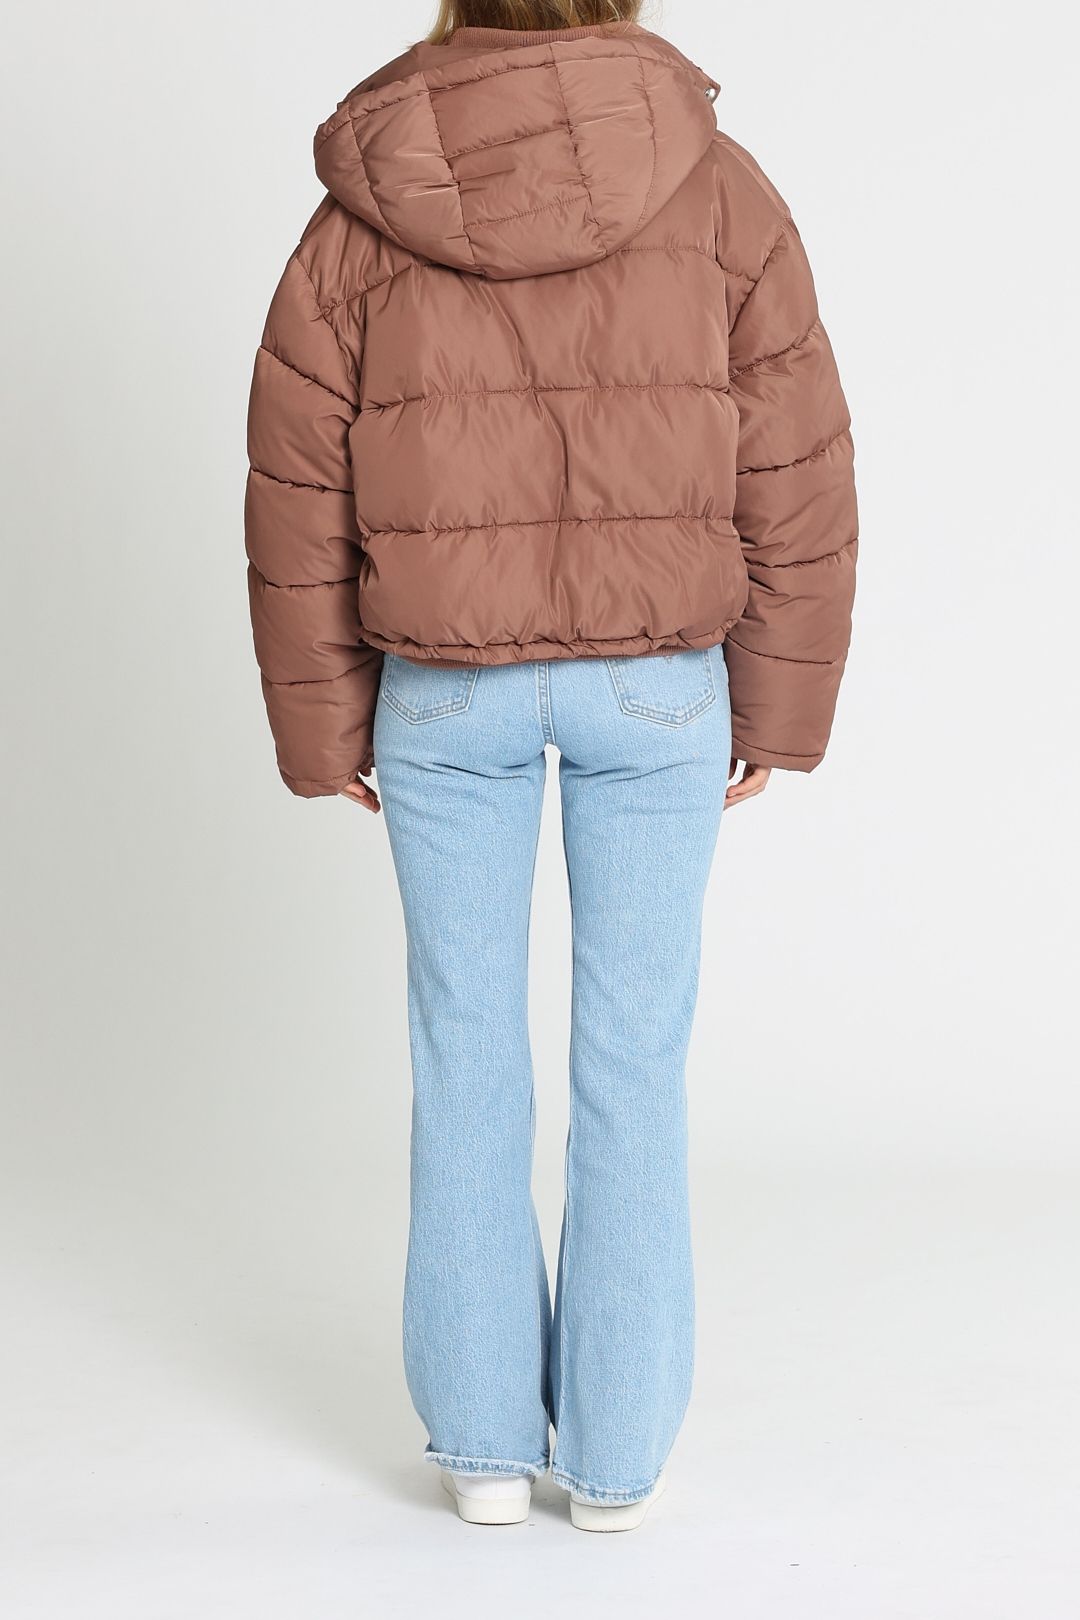 Ena Pelly Isla Cropped Puffer Jacket Coco Hooded